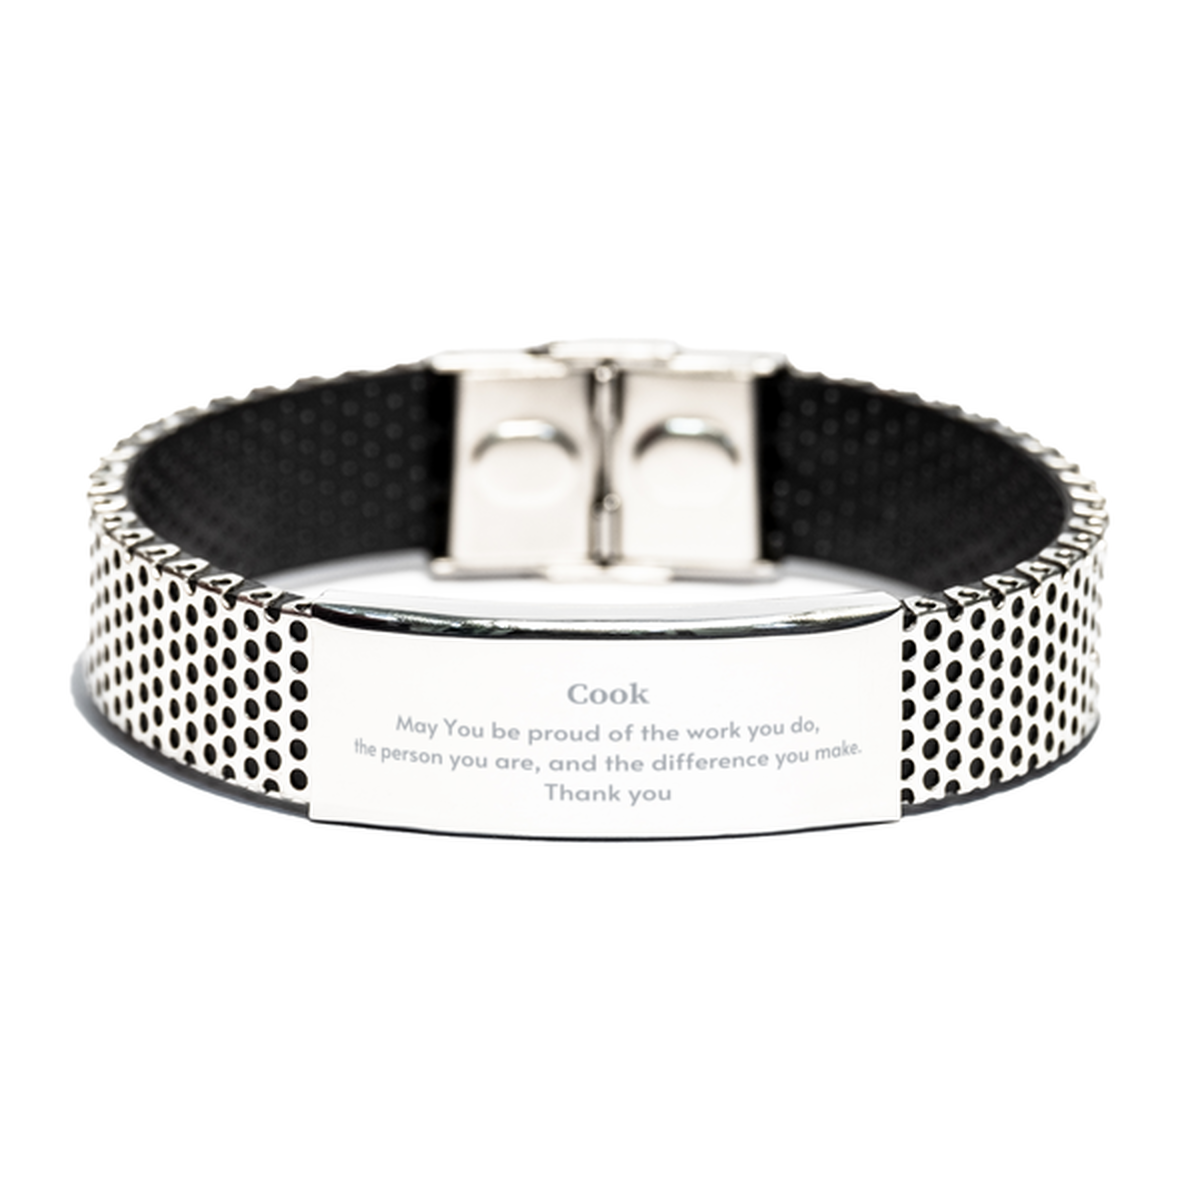 Heartwarming Stainless Steel Bracelet Retirement Coworkers Gifts for Cook, Cook May You be proud of the work you do, the person you are Gifts for Boss Men Women Friends